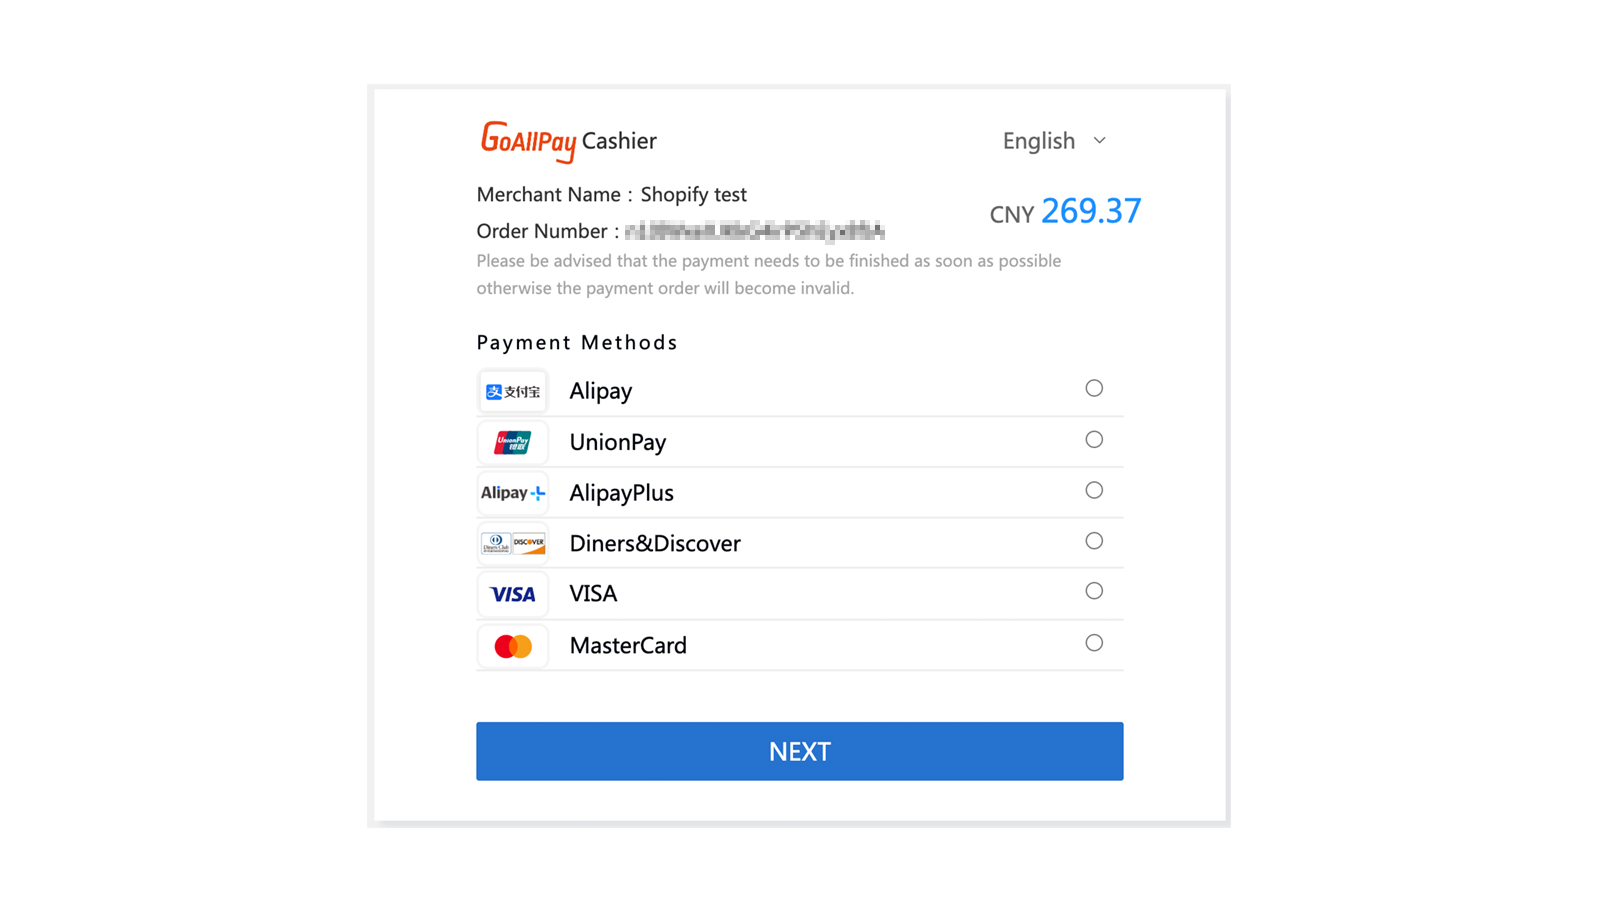 User shops on merchant and uses GoAllPay to pay